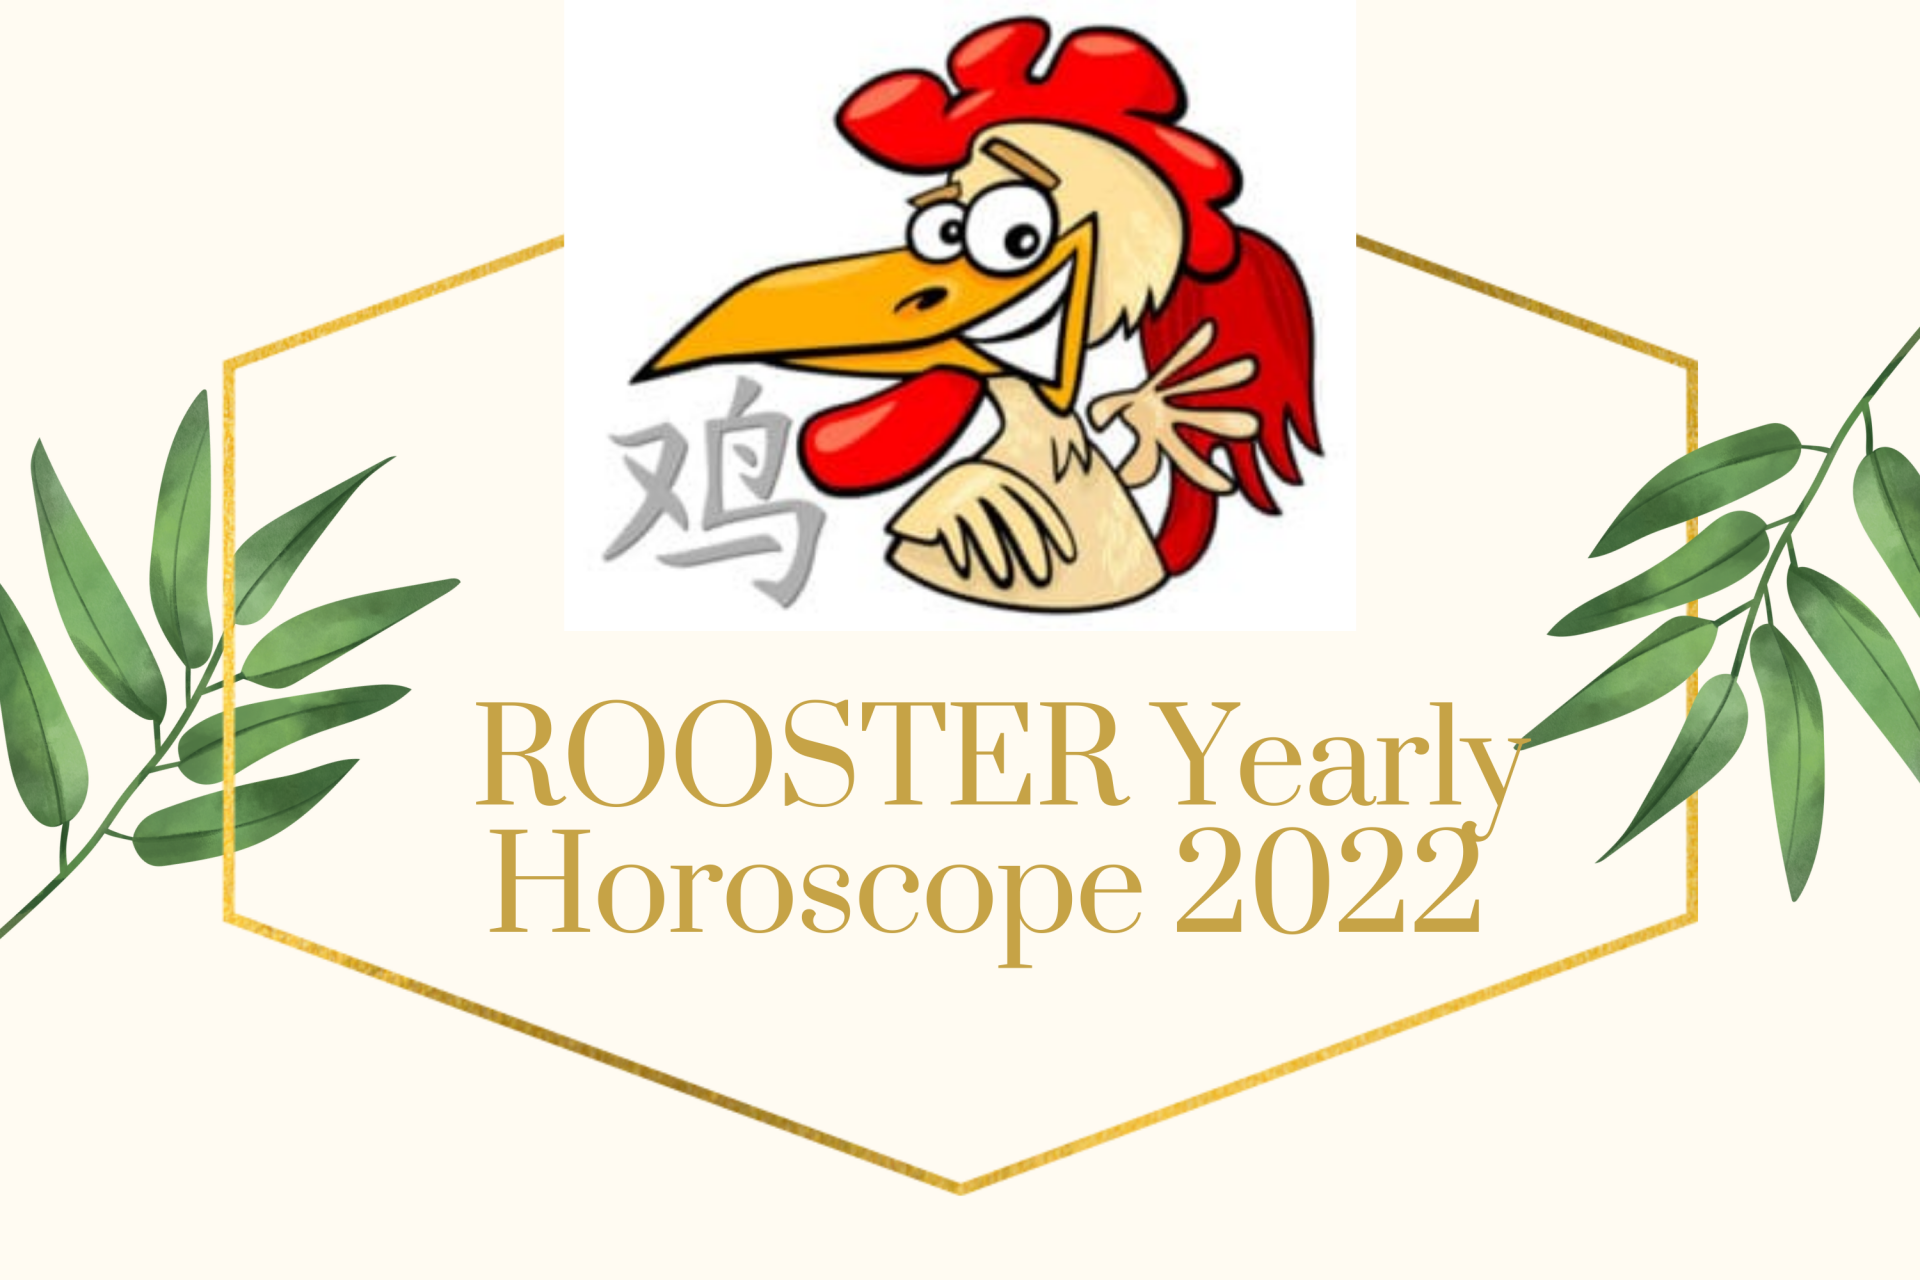 ROOSTER Yearly Horoscope 2022 – Feng Shui Prediction for Love, Money, Career and Health